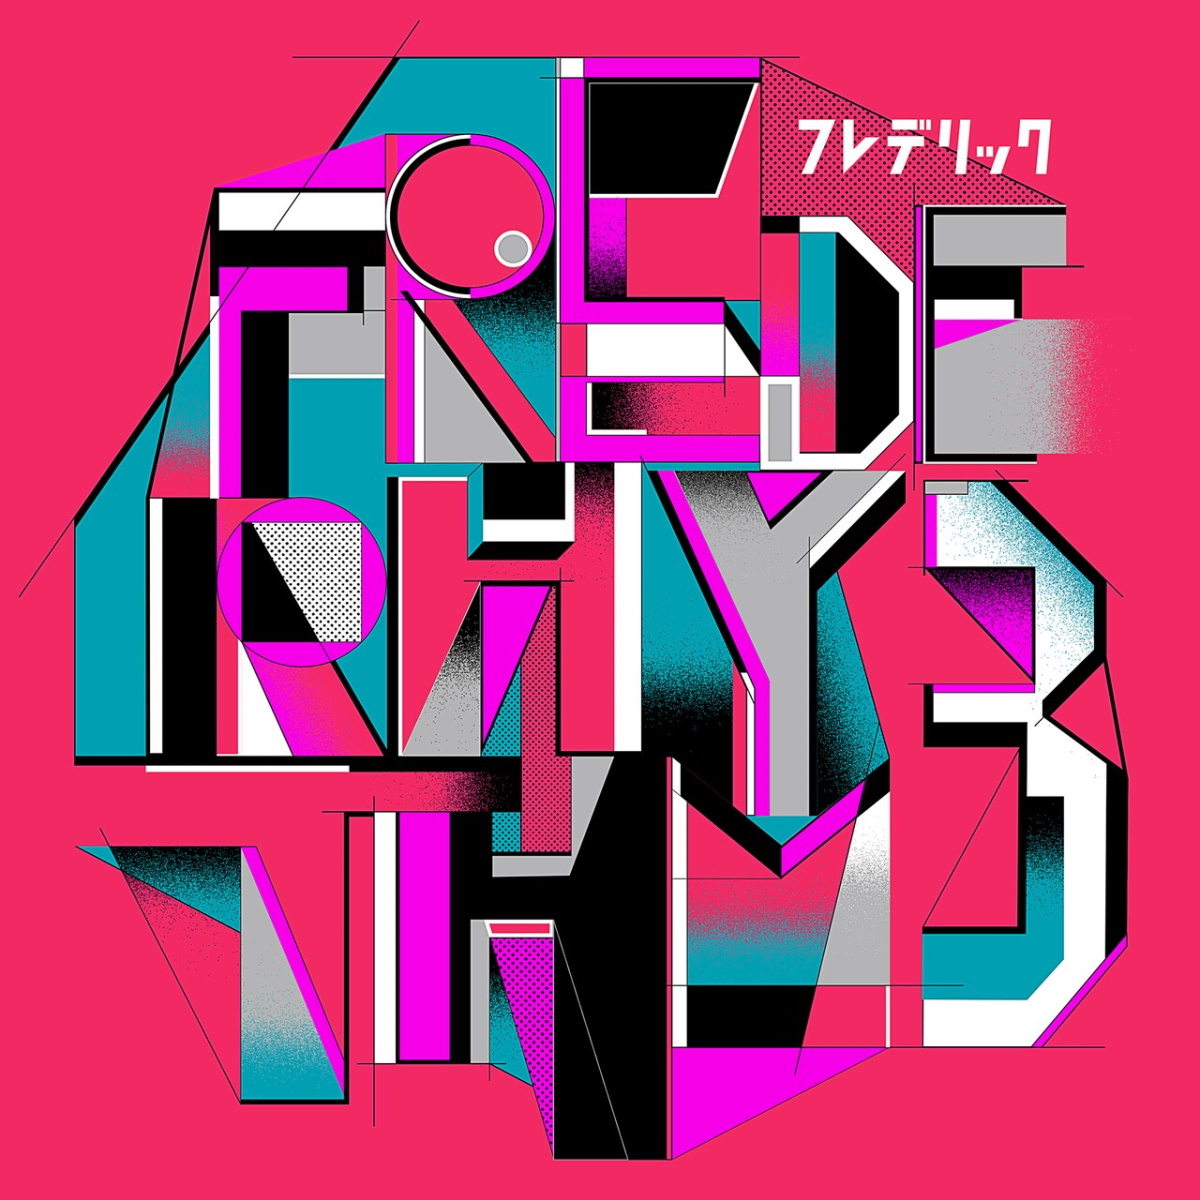 Cover art for『Frederic - サーチライトランナー』from the release『Frederhythm 3